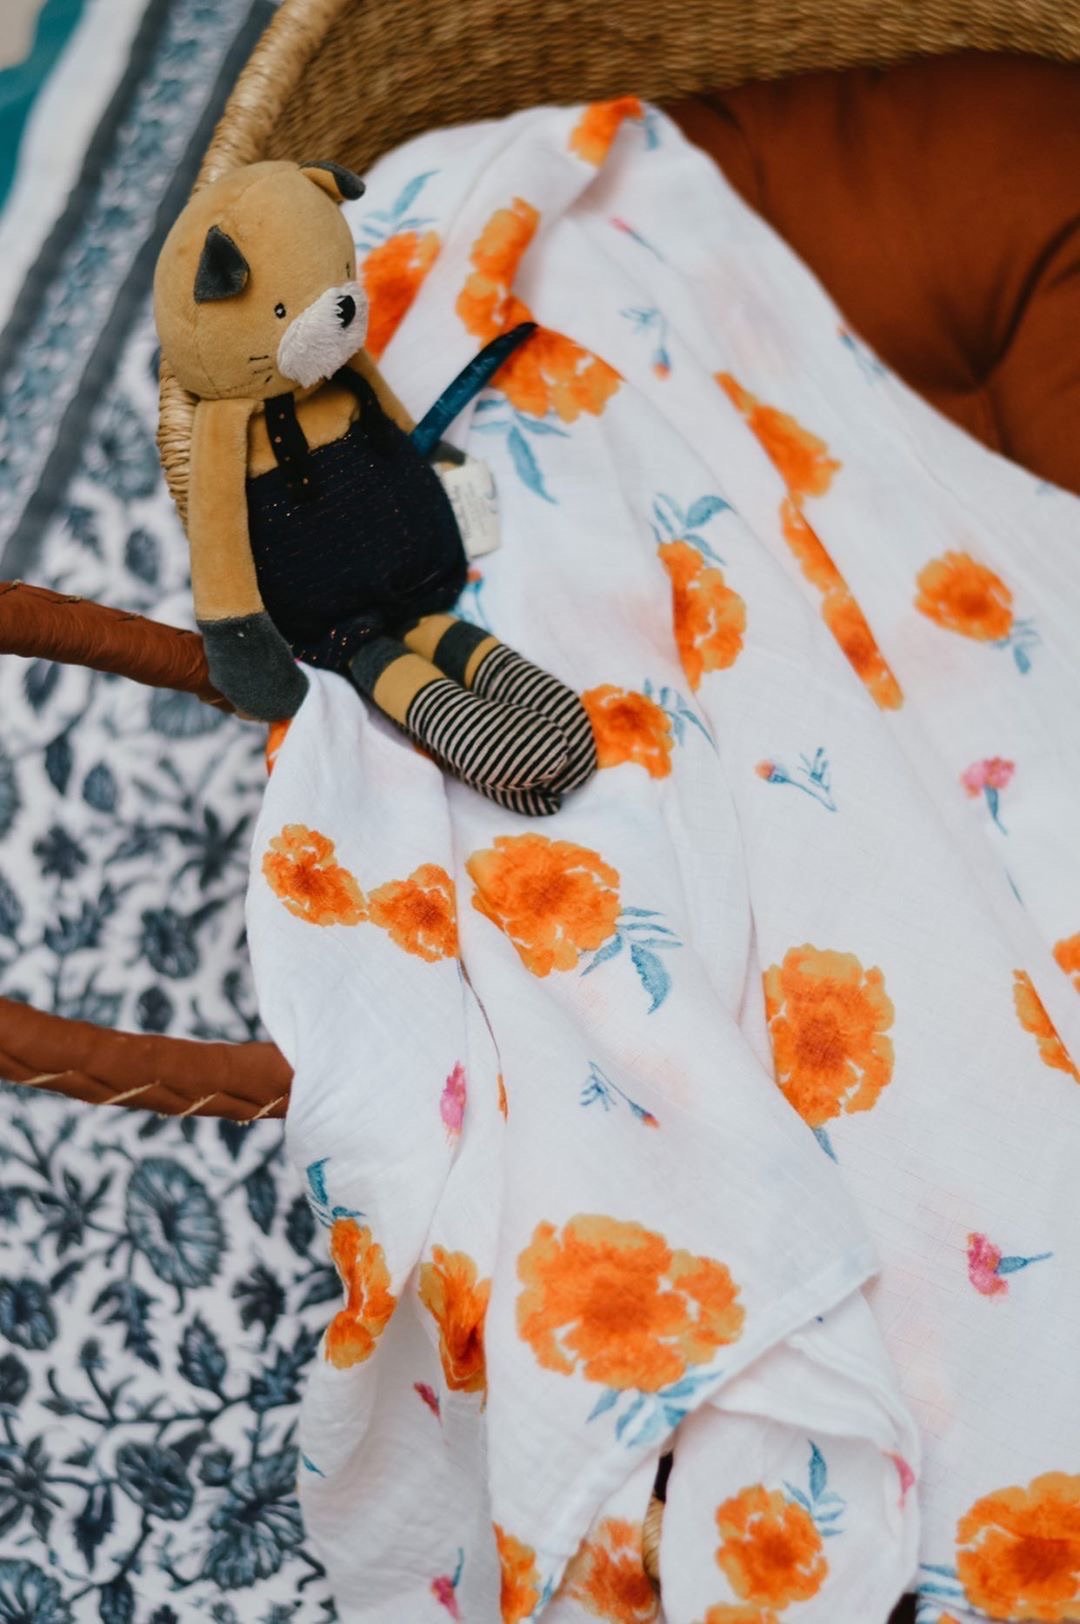 Marigold Soft Organic Cotton Swaddle for Home or On the Go